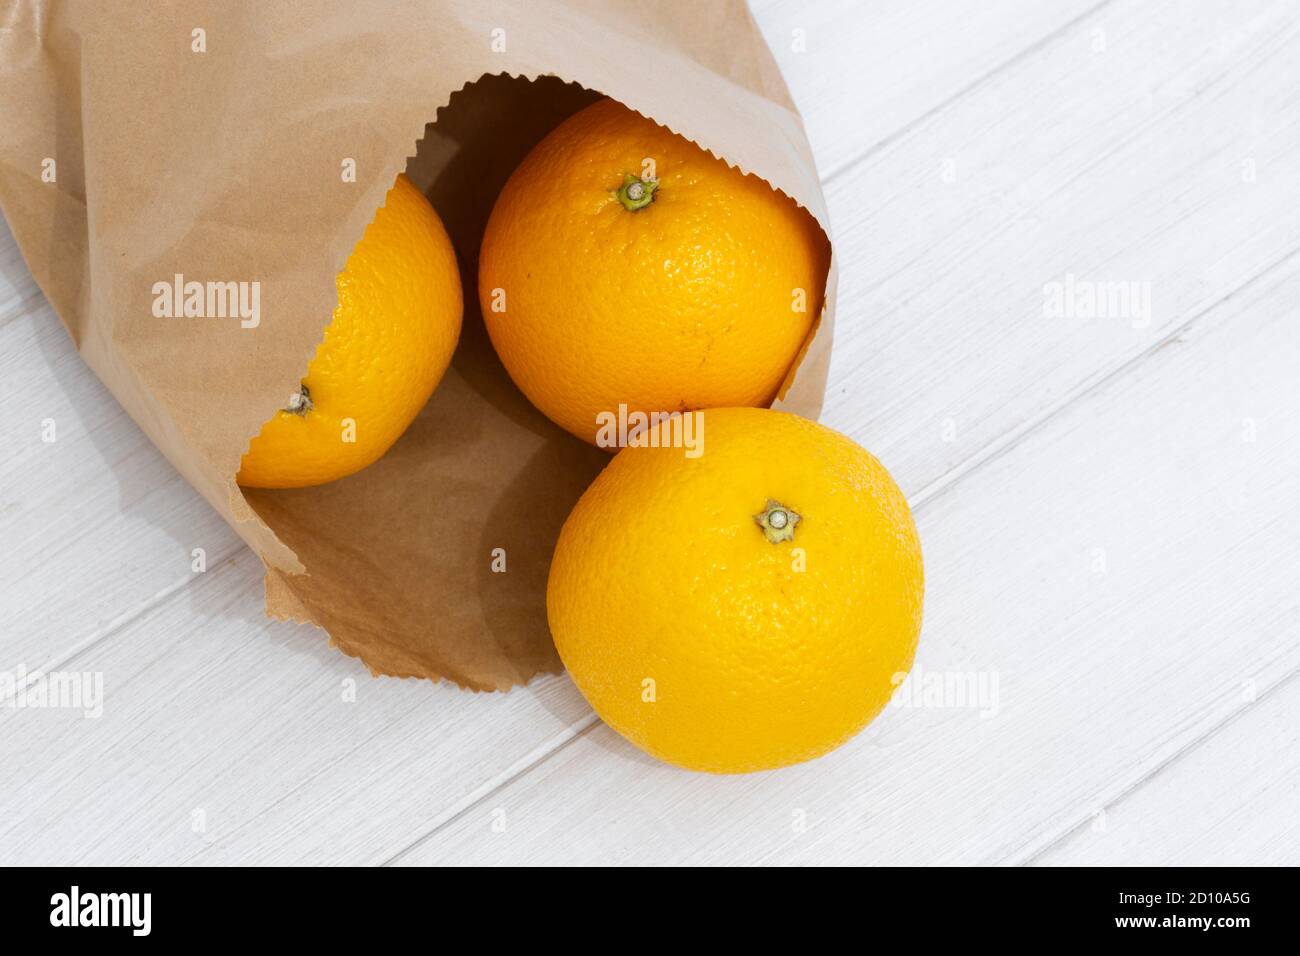 https://c8.alamy.com/comp/2D10A5G/oranges-in-a-brown-paper-bag-on-a-white-wood-background-environmentally-friendly-packaging-concept-2D10A5G.jpg